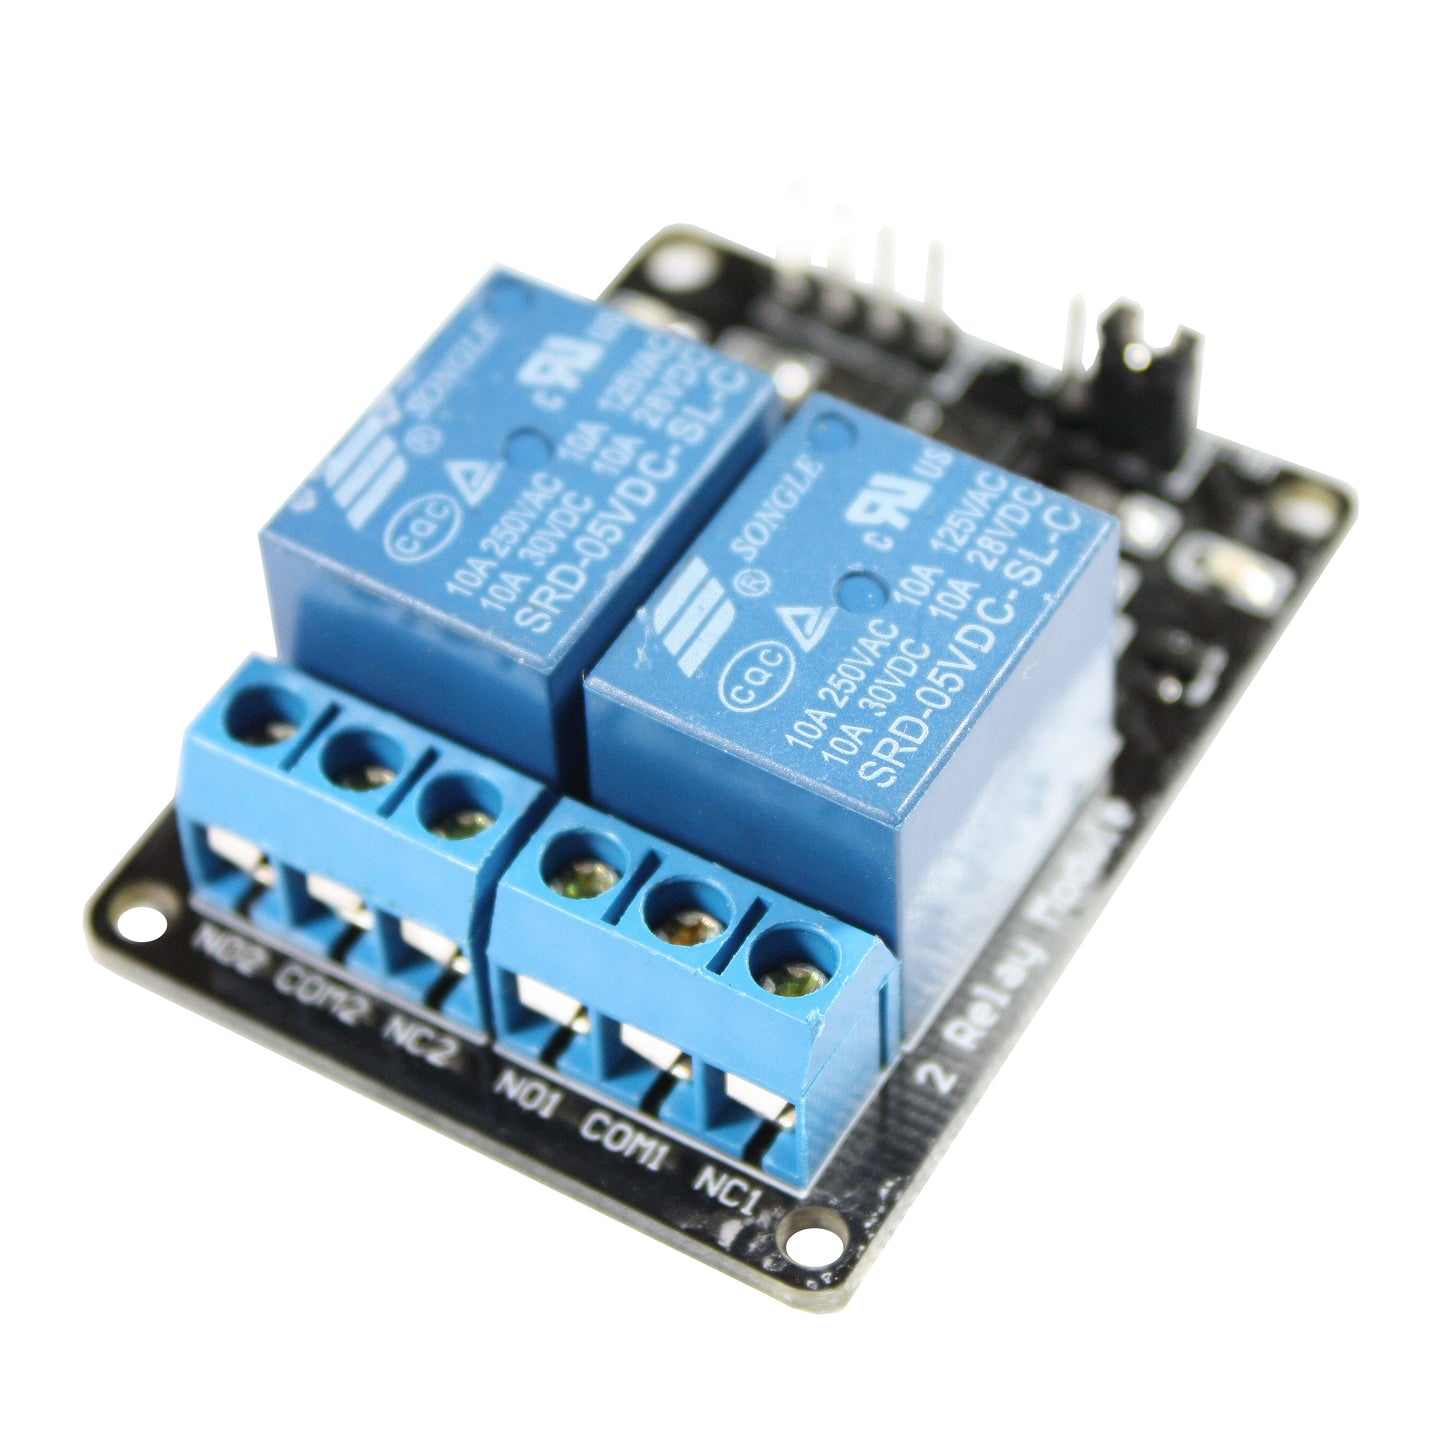 2-Channel Relay Module with Opto-isolator, 5V